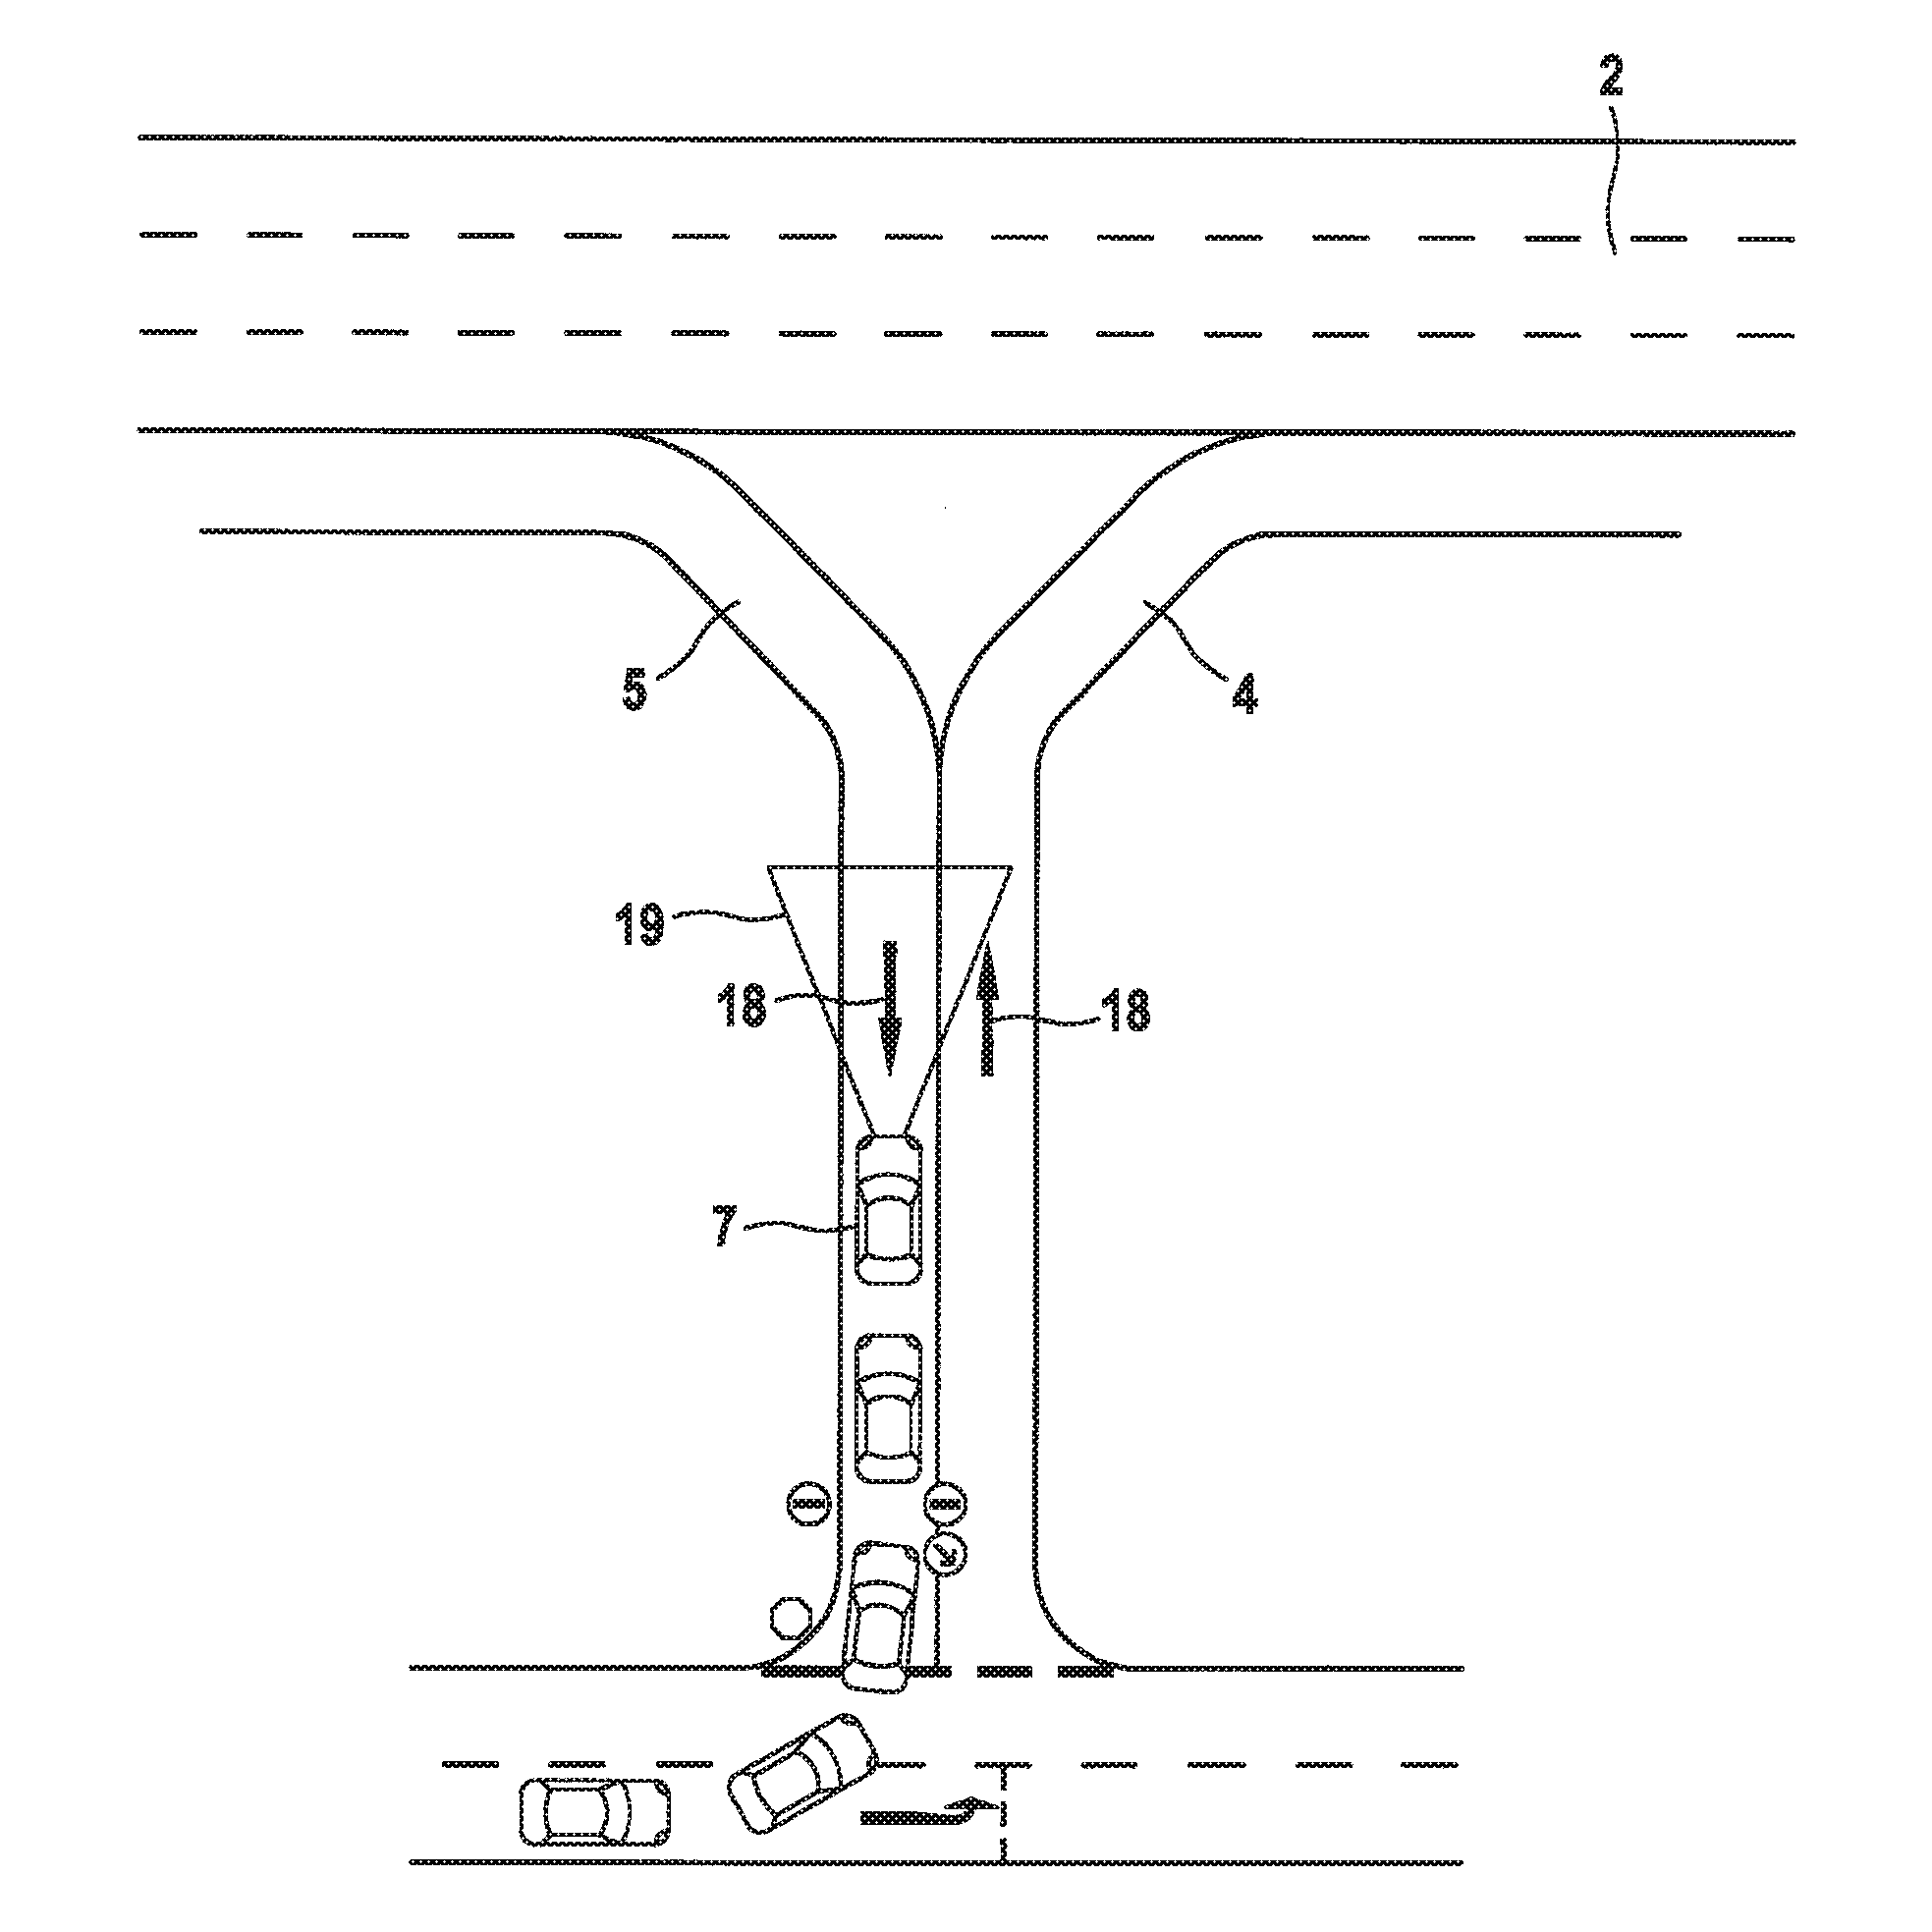 Method and control and detection unit for checking the plausibility of a wrong-way driving incident of a motor vehicle